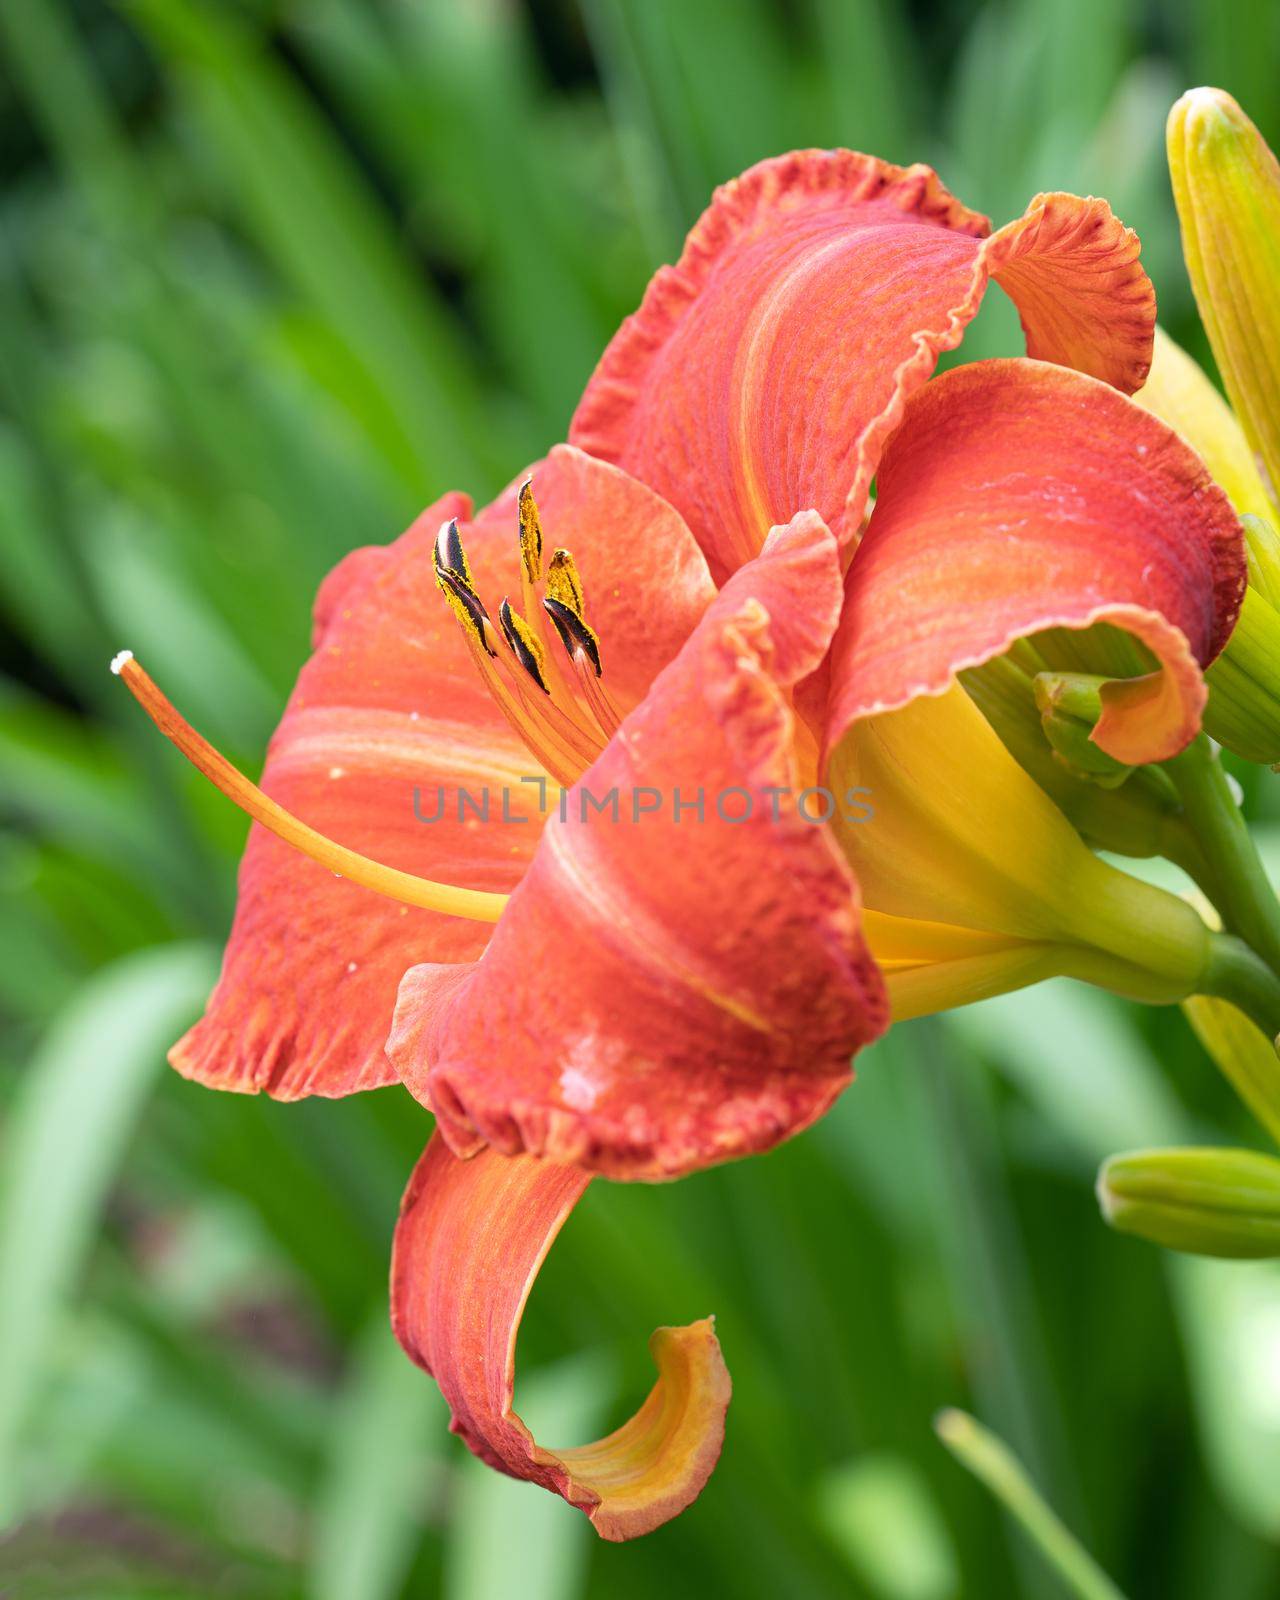 Day lily (Hemerocallis), close up of the flower head